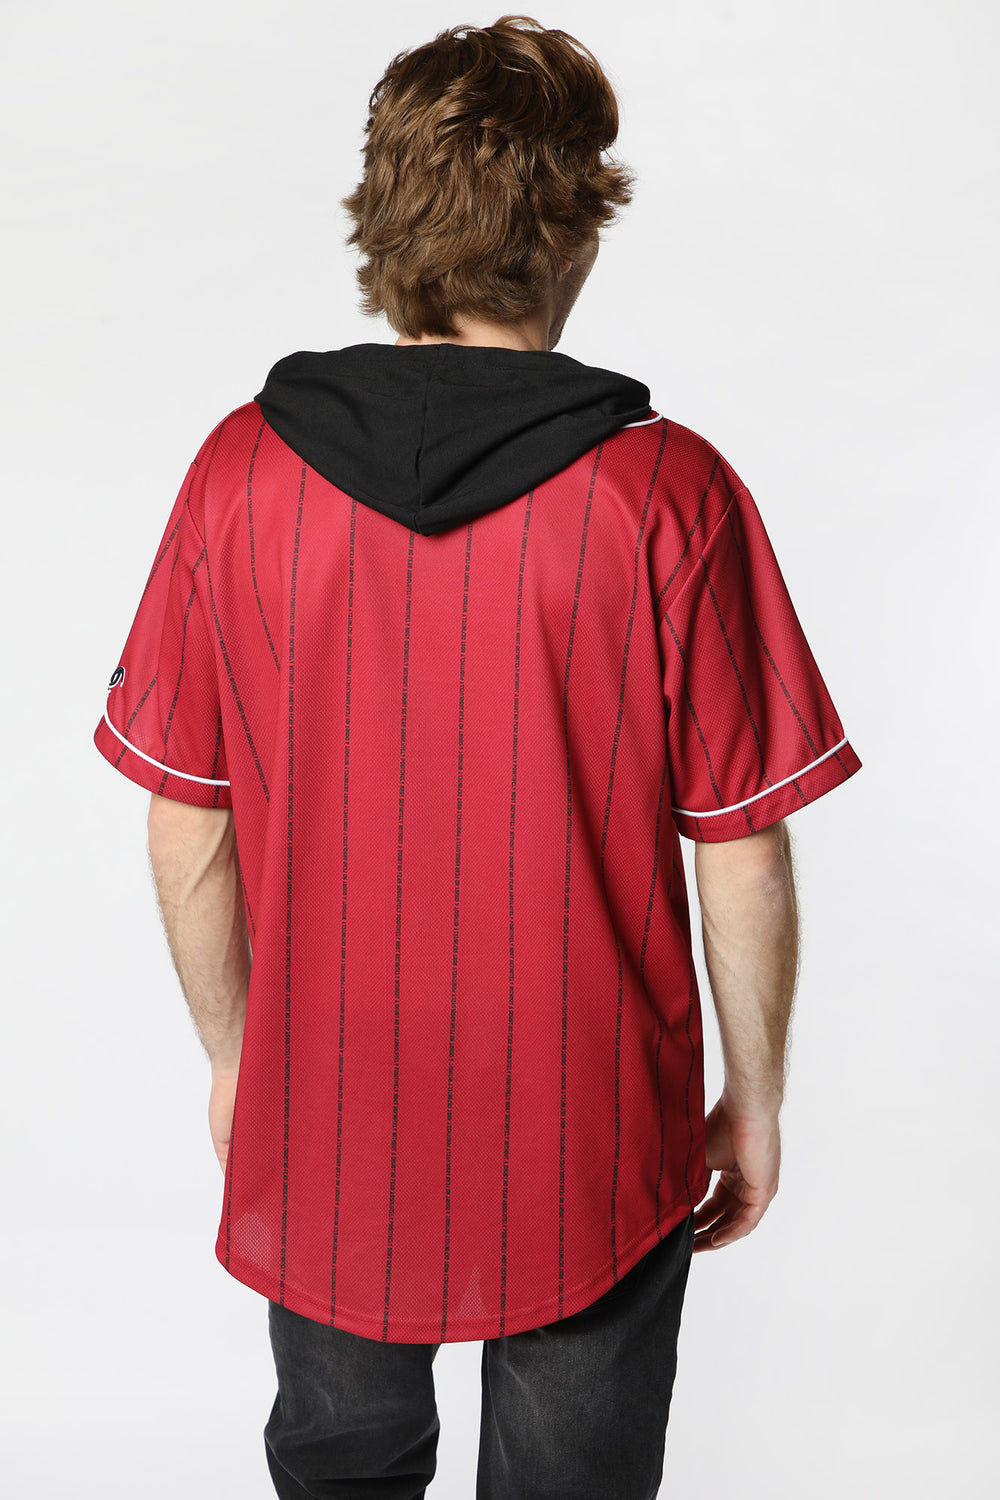 No Fear Mens Hooded Baseball Jersey Red